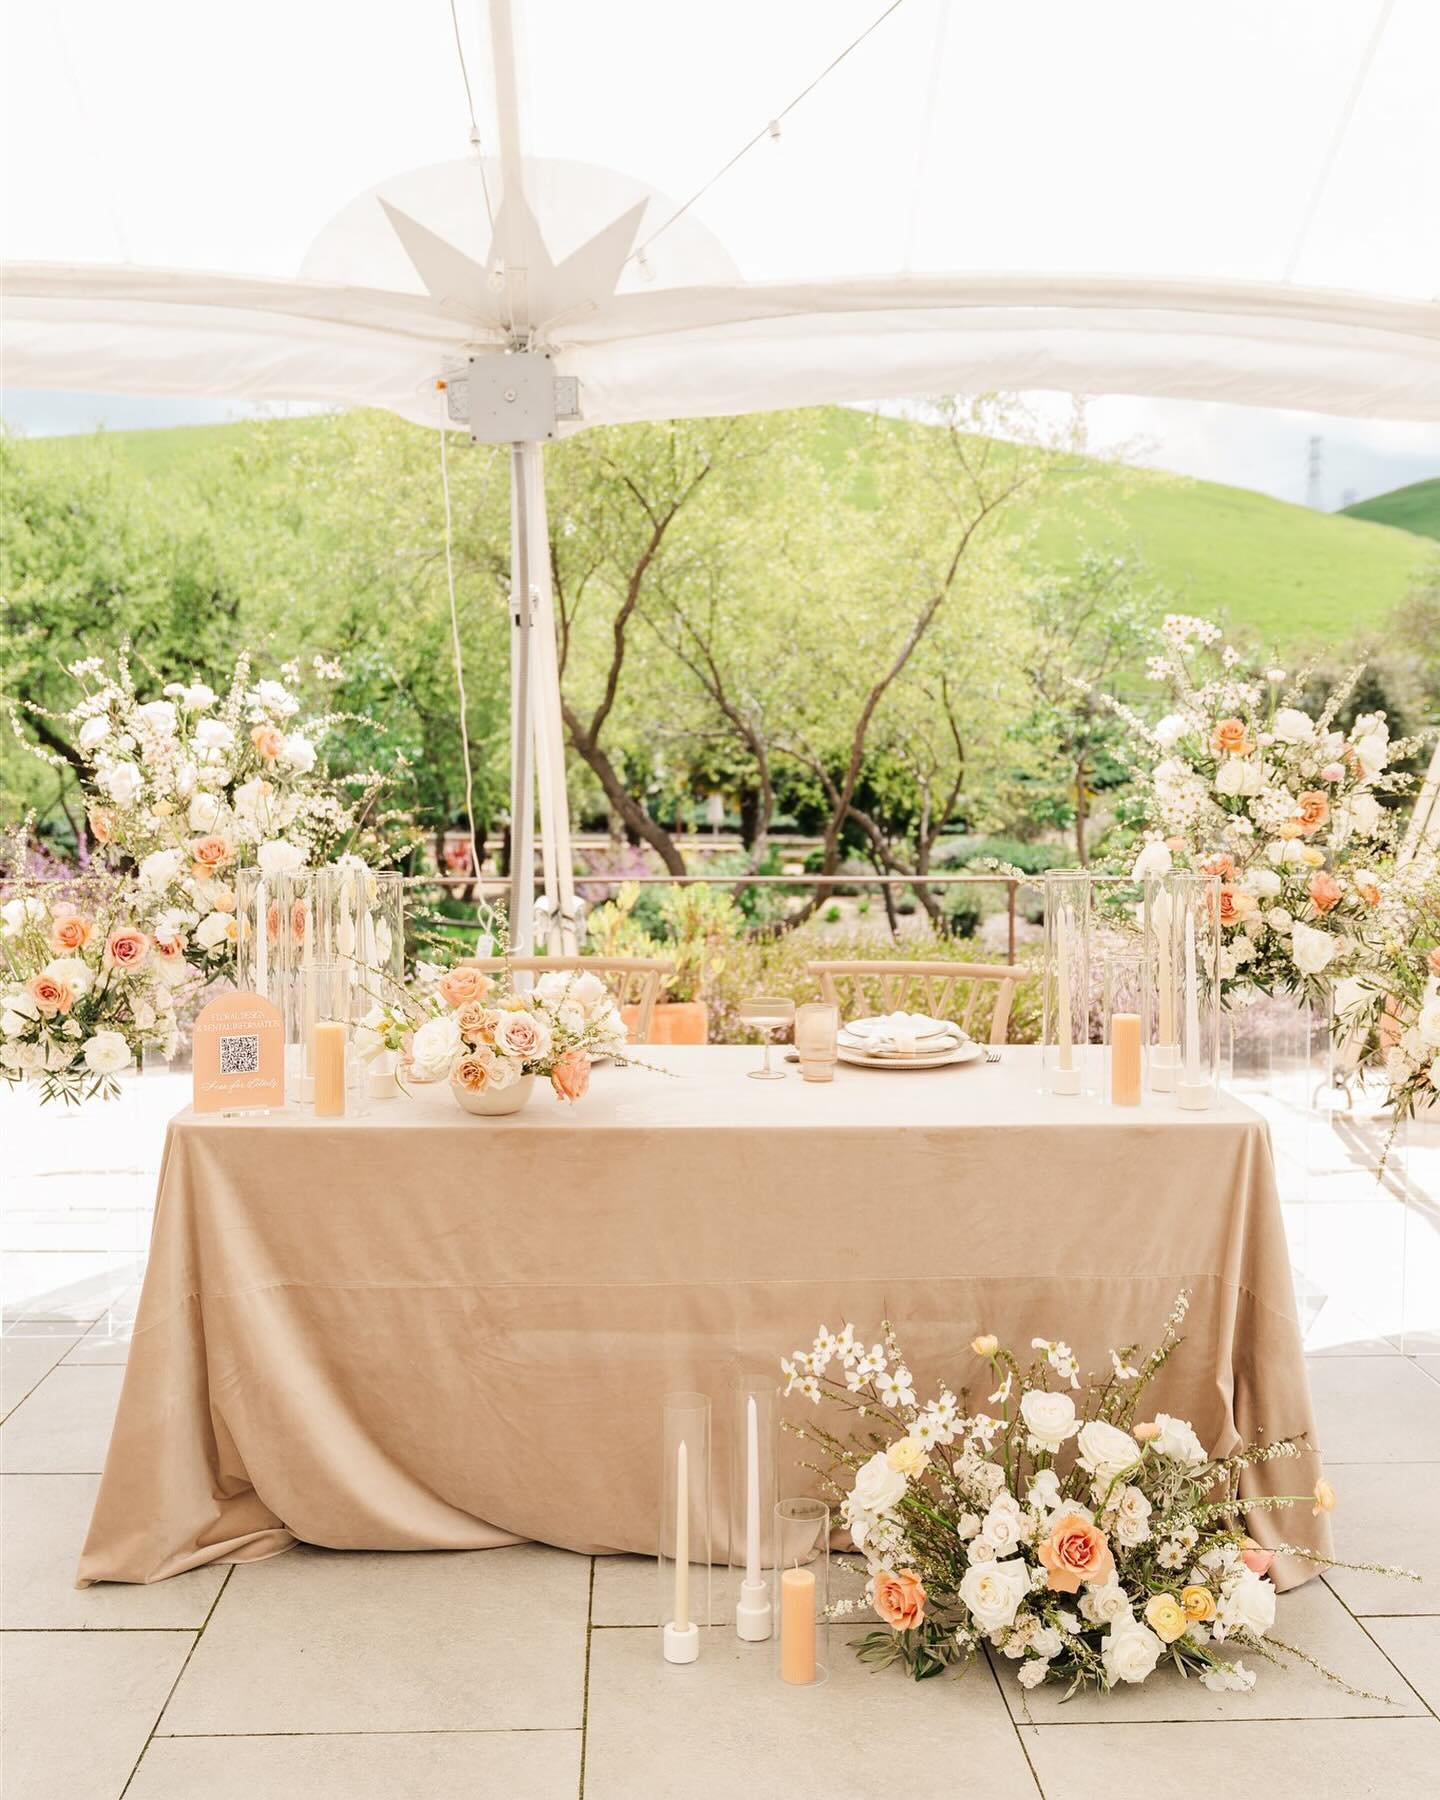 📷A floral design that frames your sweetheart table will always make for a picture perfect design concept!
.
Planning &amp; Design | @simplylovely_events 
Photography | @jkapture_studios 
Florals | @thebloombarco 
Rentals | @pleasantonrentals 
Signag